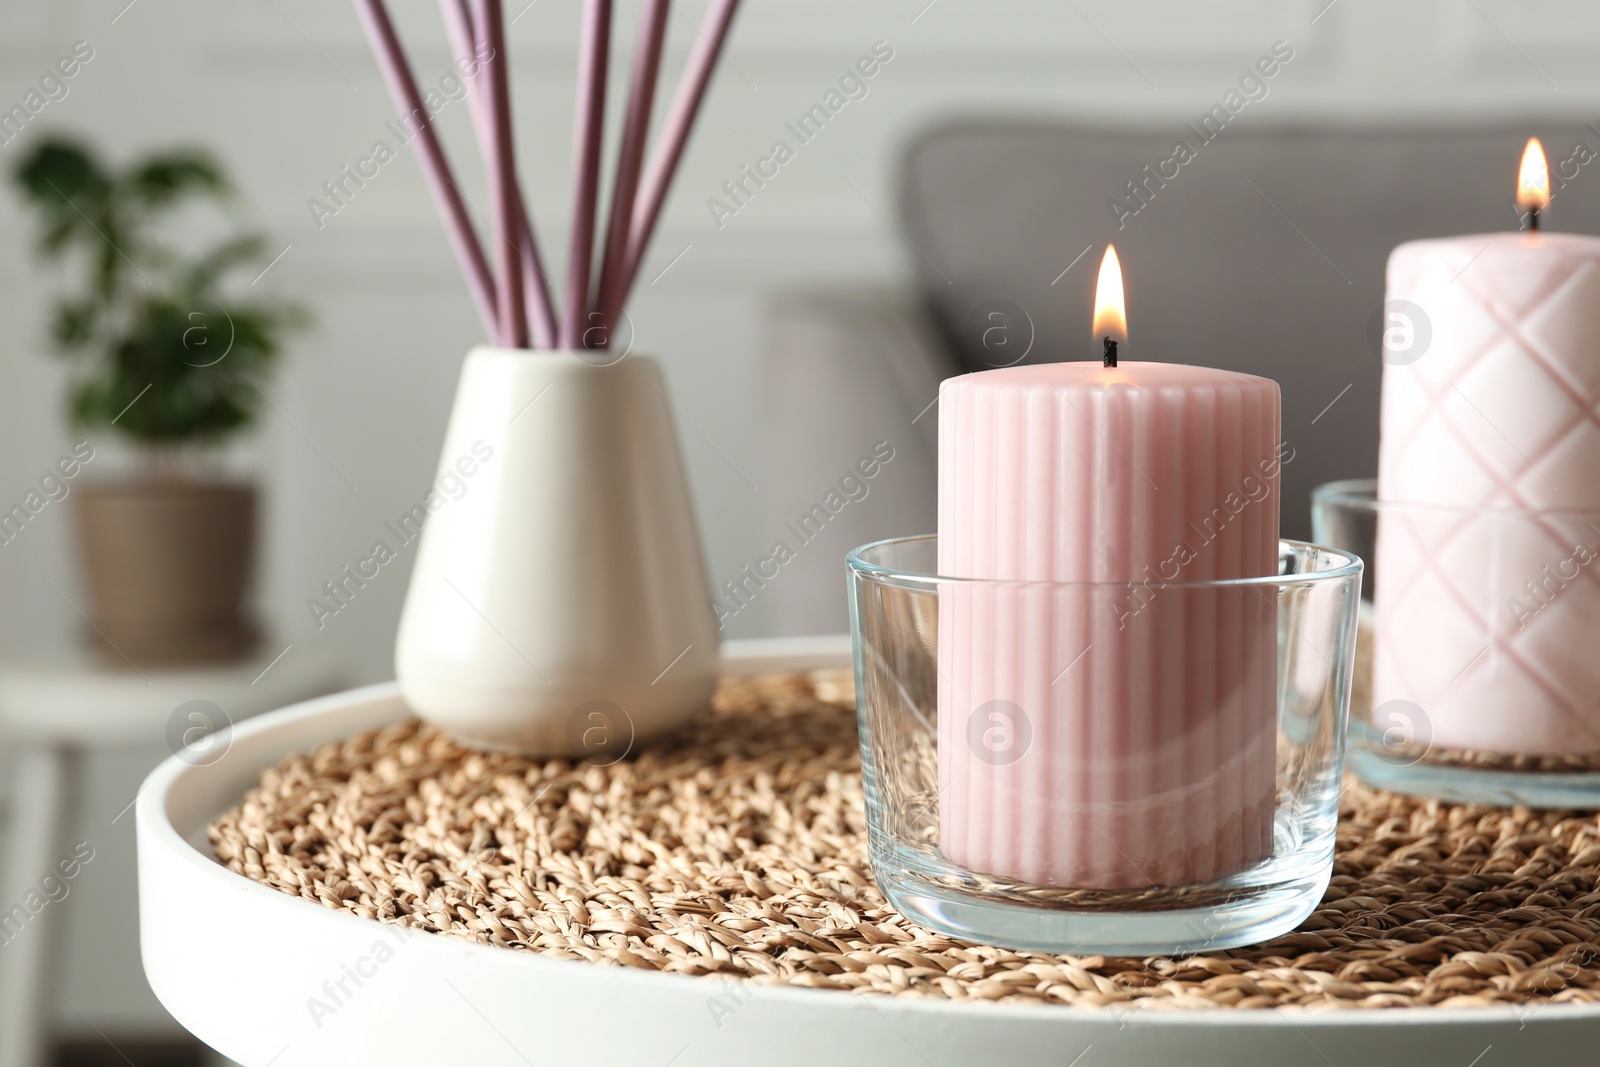 Photo of Burning candles and air reed freshener on table indoors, space for text